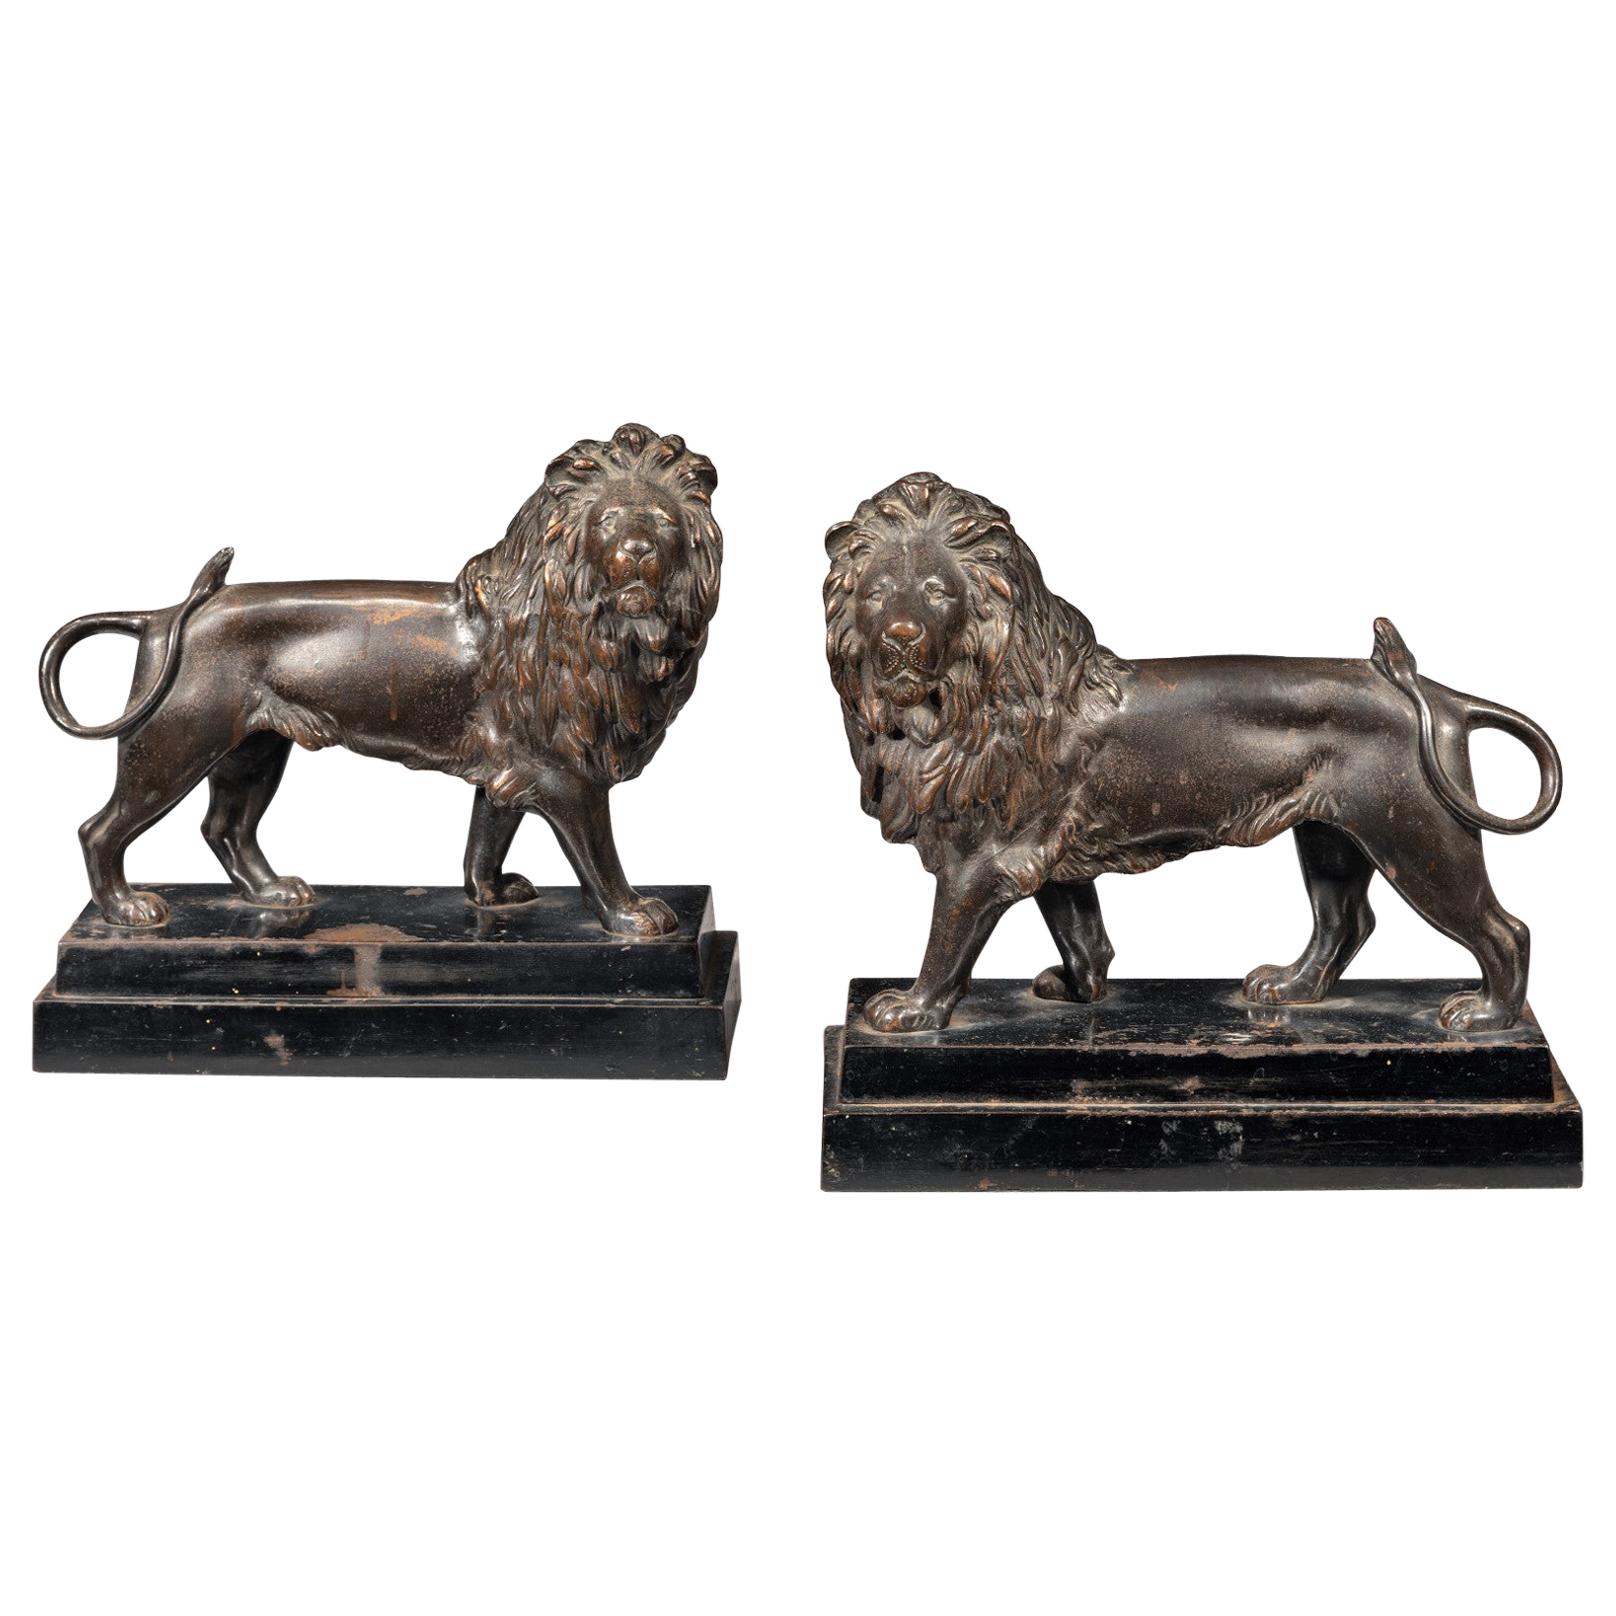 Pair of Early 19th Century Regency Cast Iron Lion Sculptures